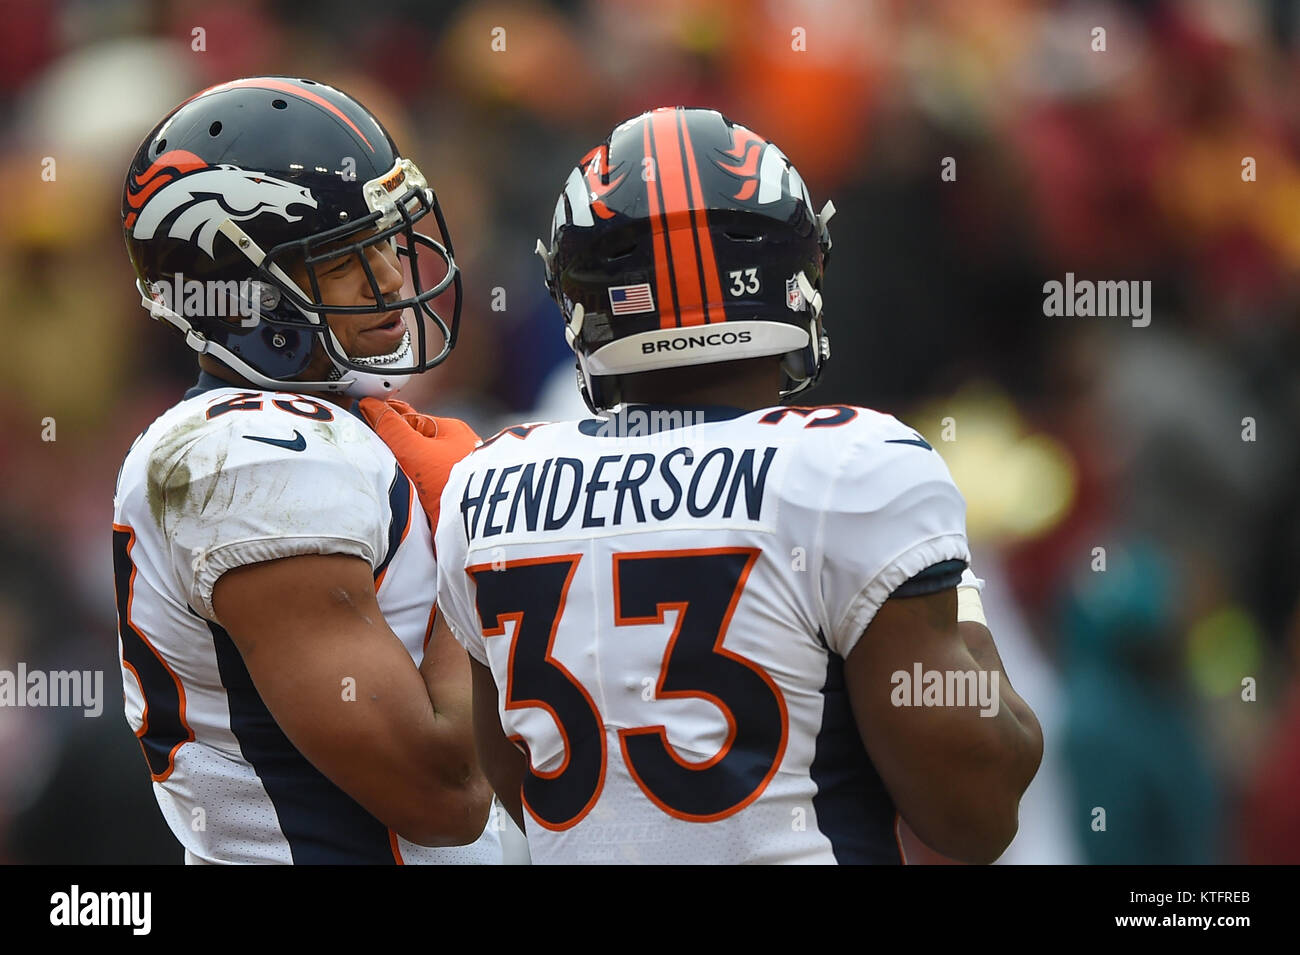 Landover, MD, USA. 24th Dec, 2017. Denver Broncos running back Devontae Booker (23) and running back De'Angelo Henderson (33) wait for a kickoff during the season ending home matchup between the Denver Broncos and the Washington Redskins at FedEx Field in Landover, MD. Credit: csm/Alamy Live News Stock Photo